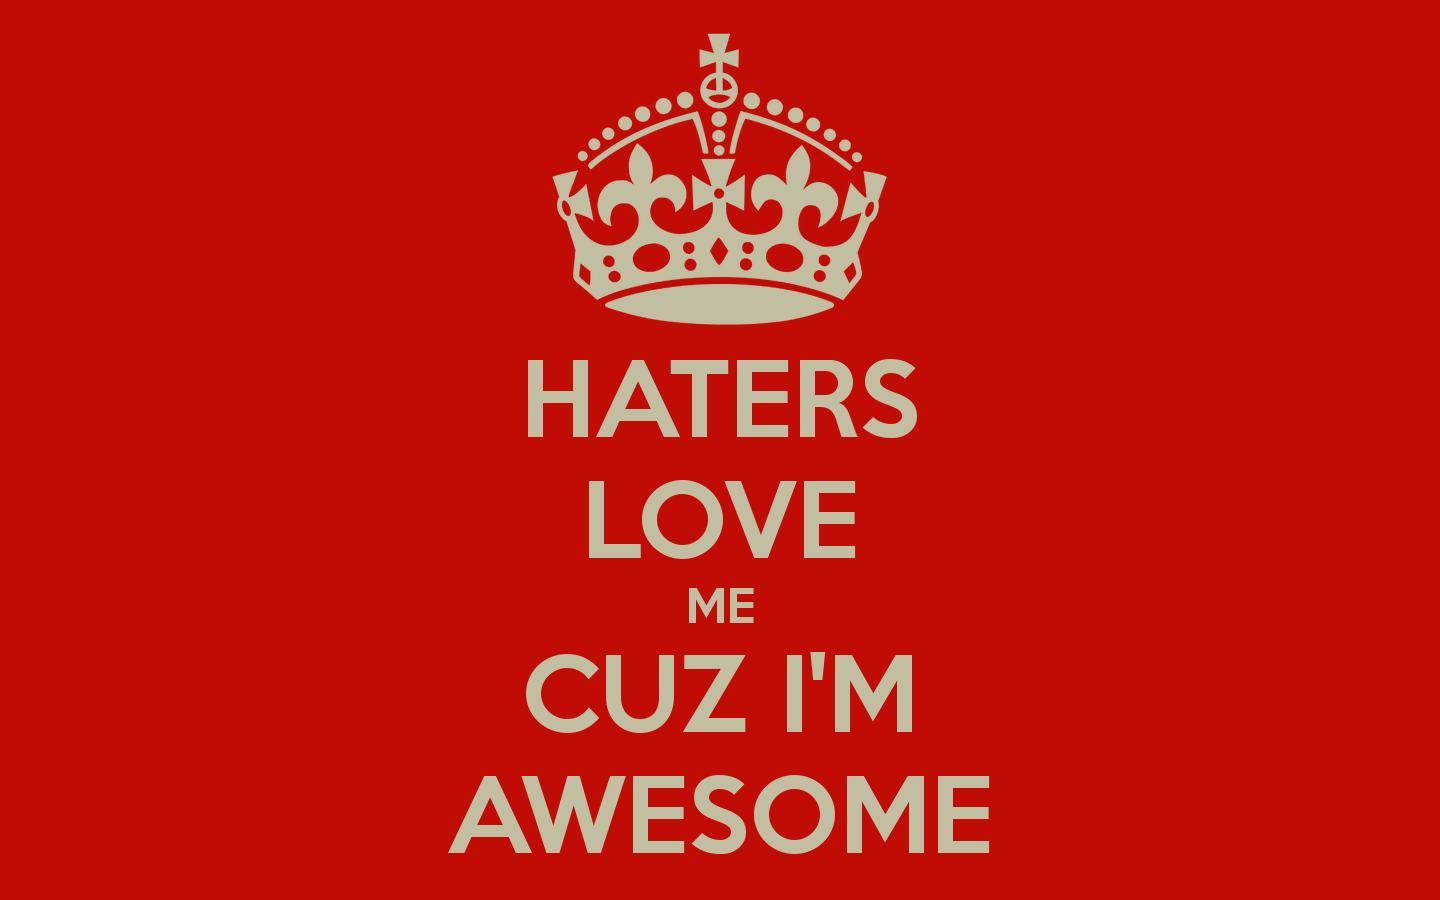 Haters Wallpaper